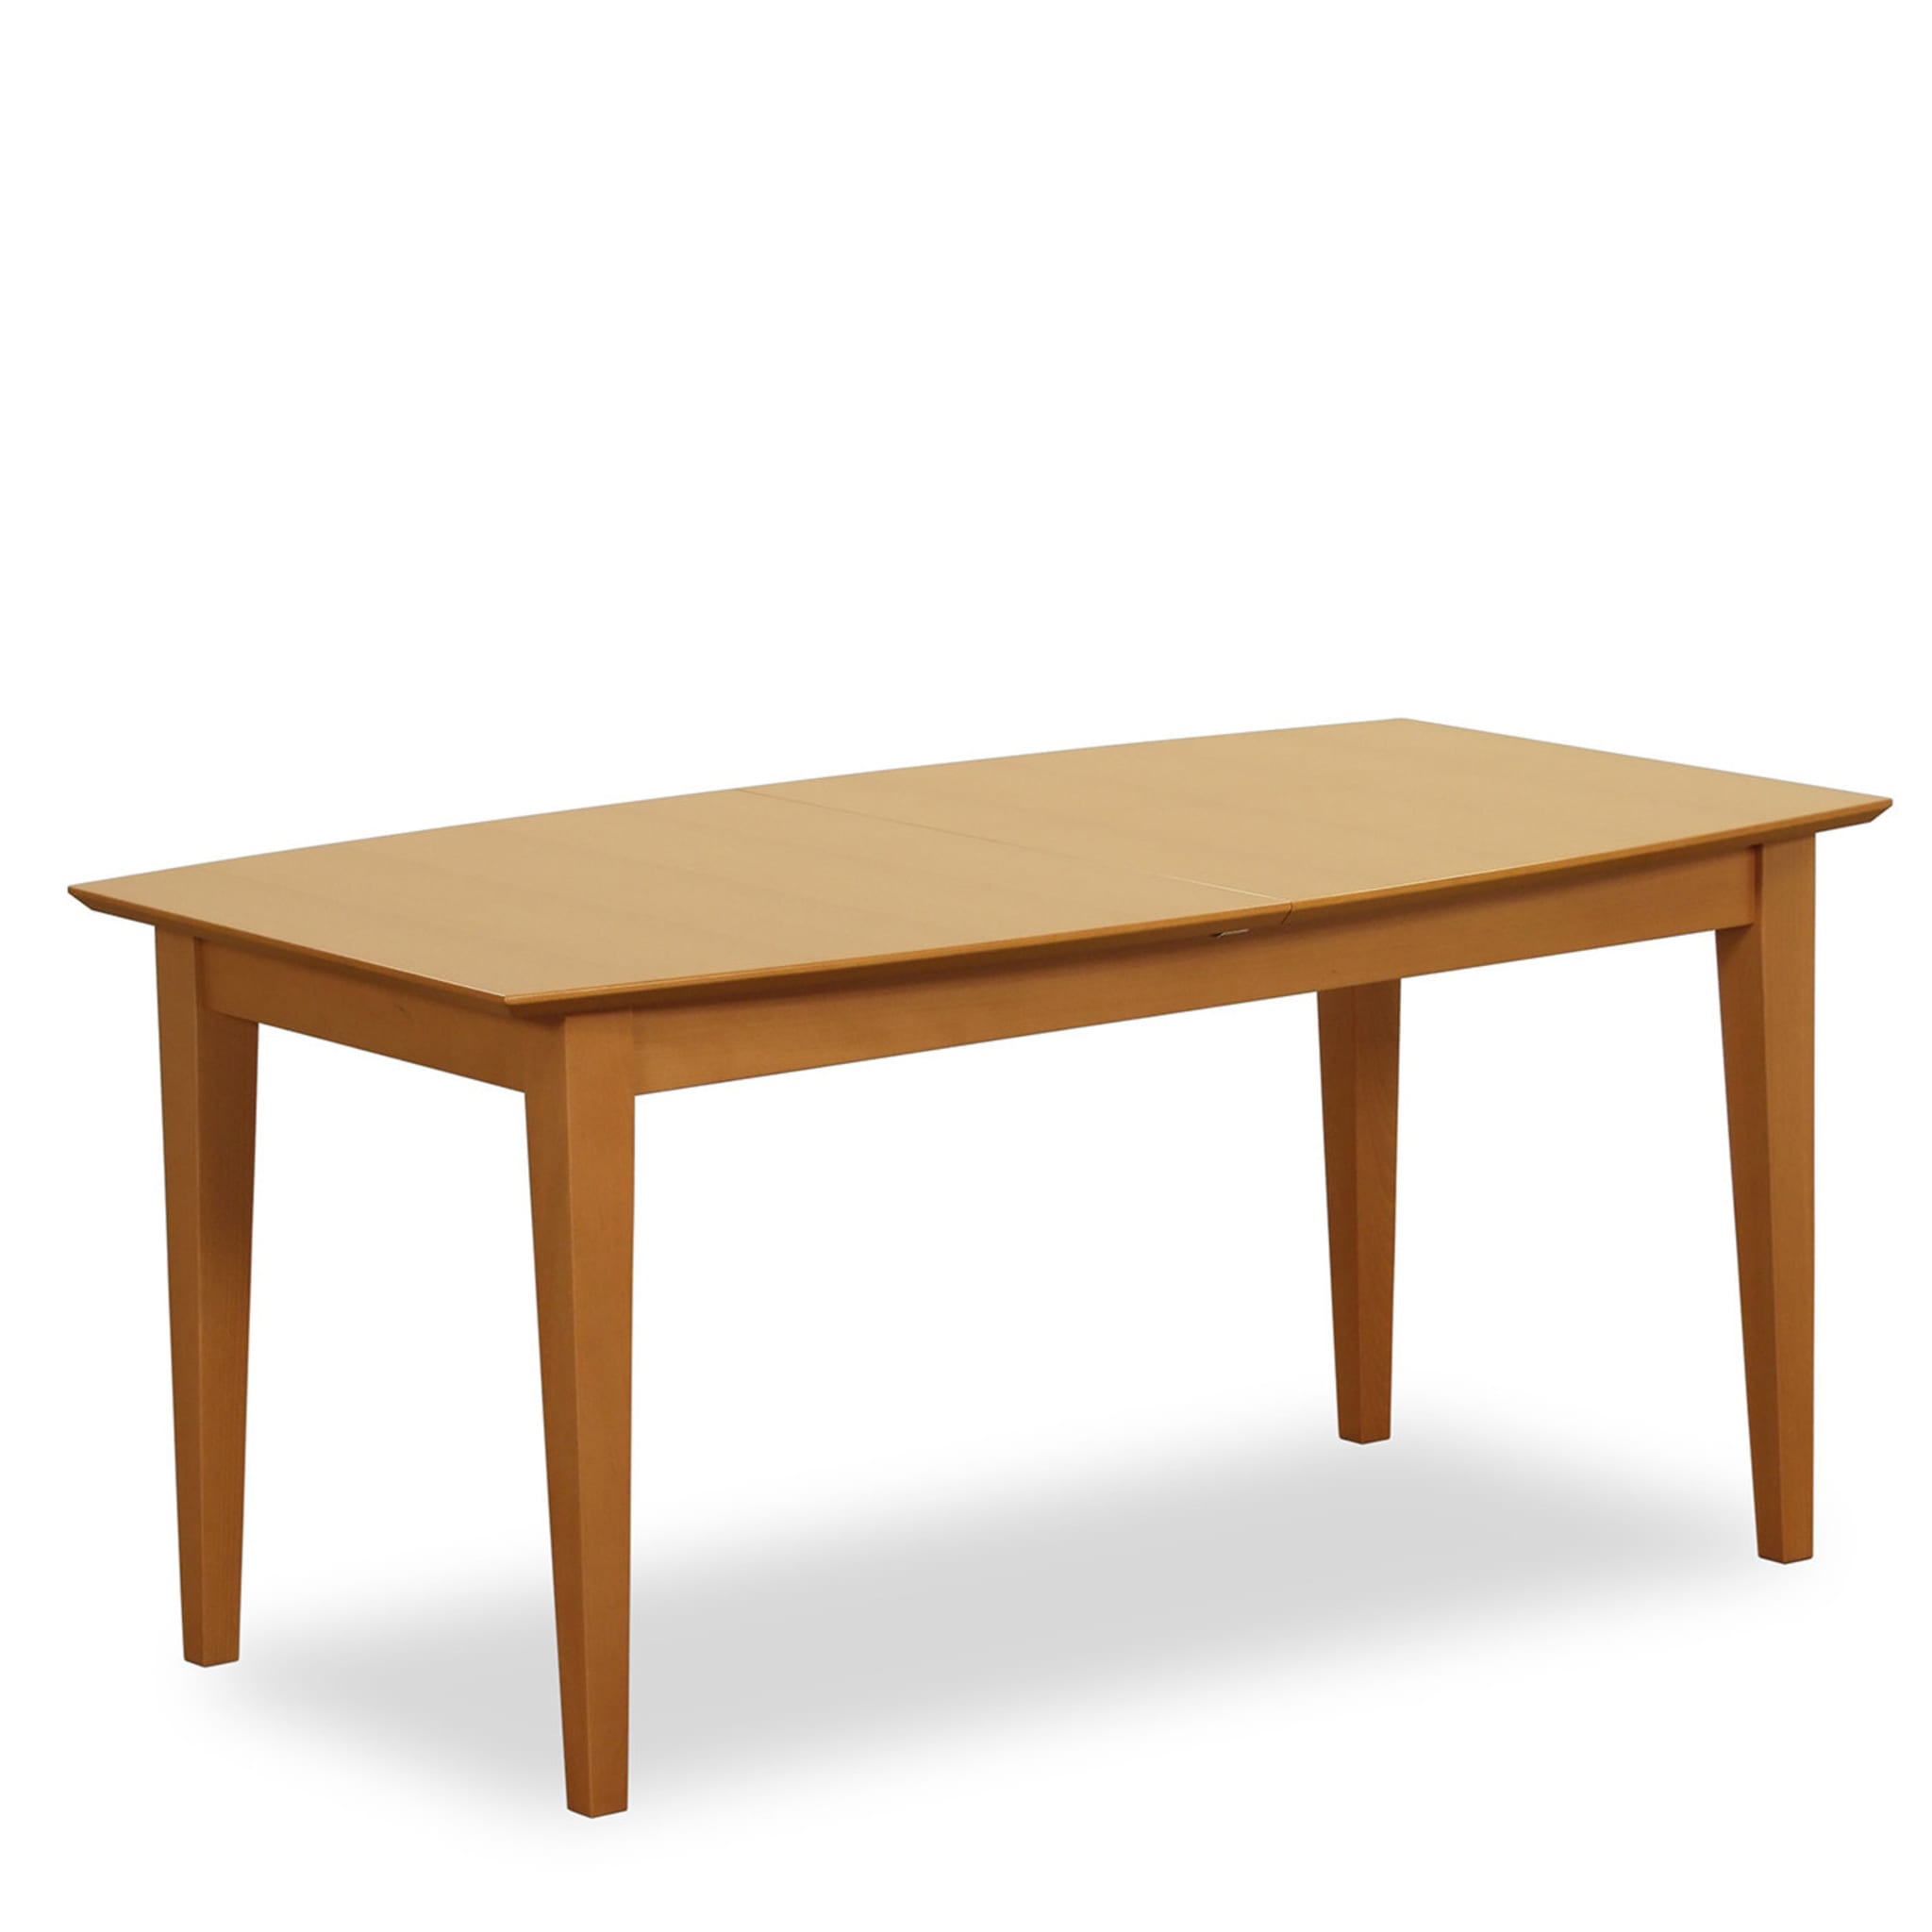 640/35 Extendable Dining Table - Alternative view 2